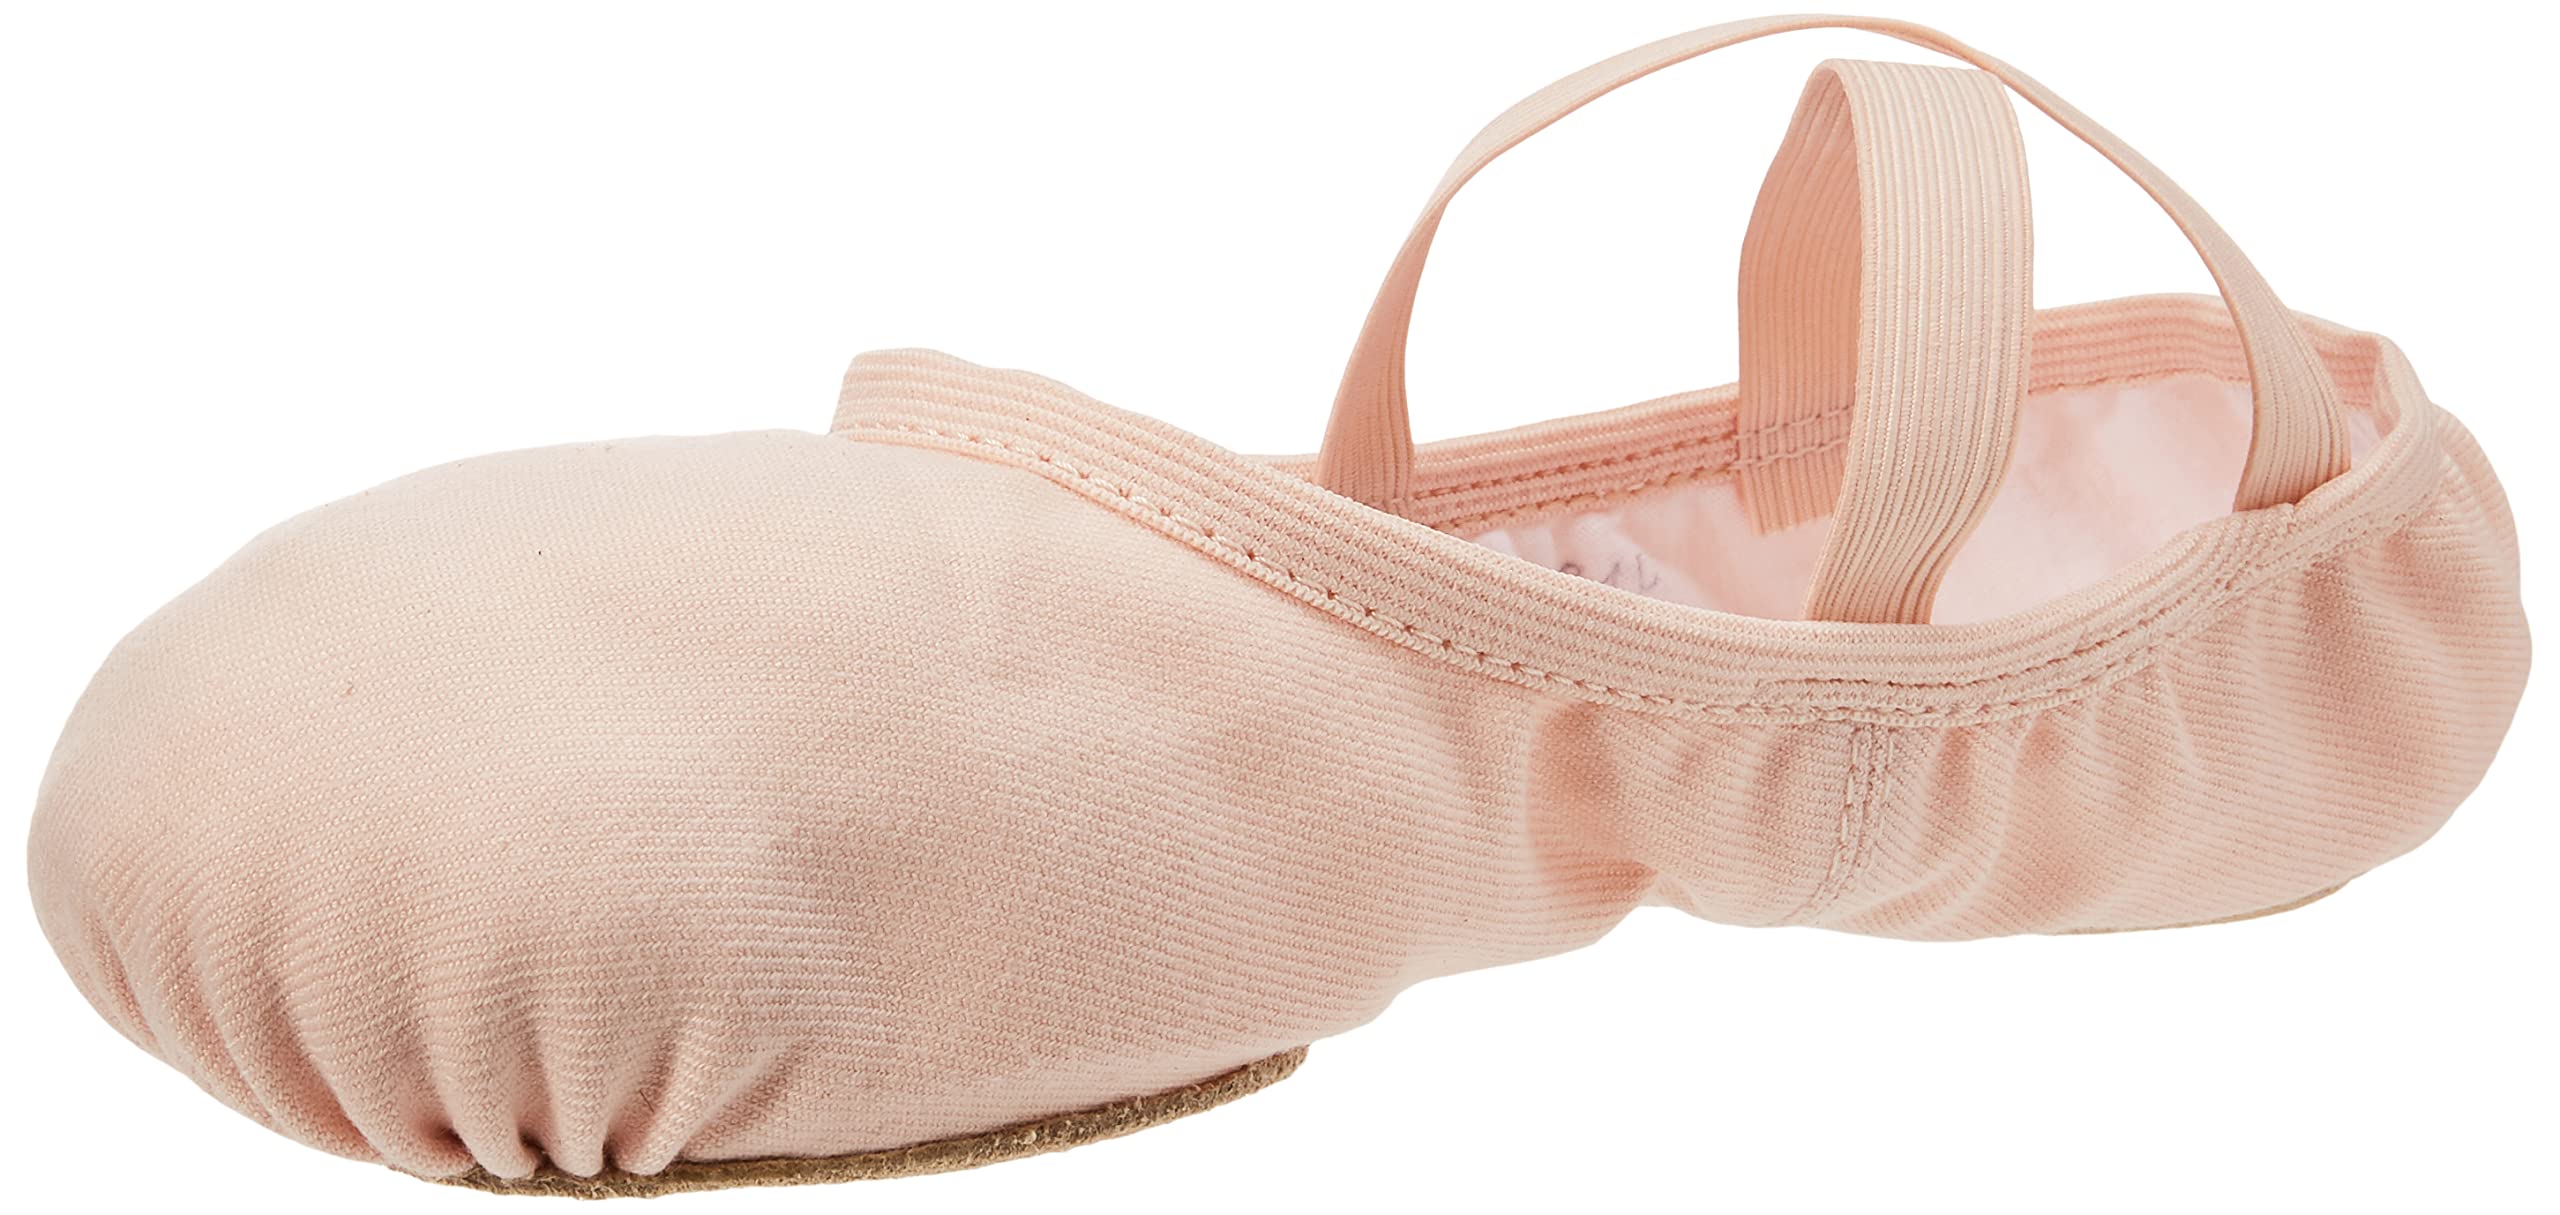 Bloch womens Performa Dance Shoe, Theatrical Pink, 3.5 Wide US